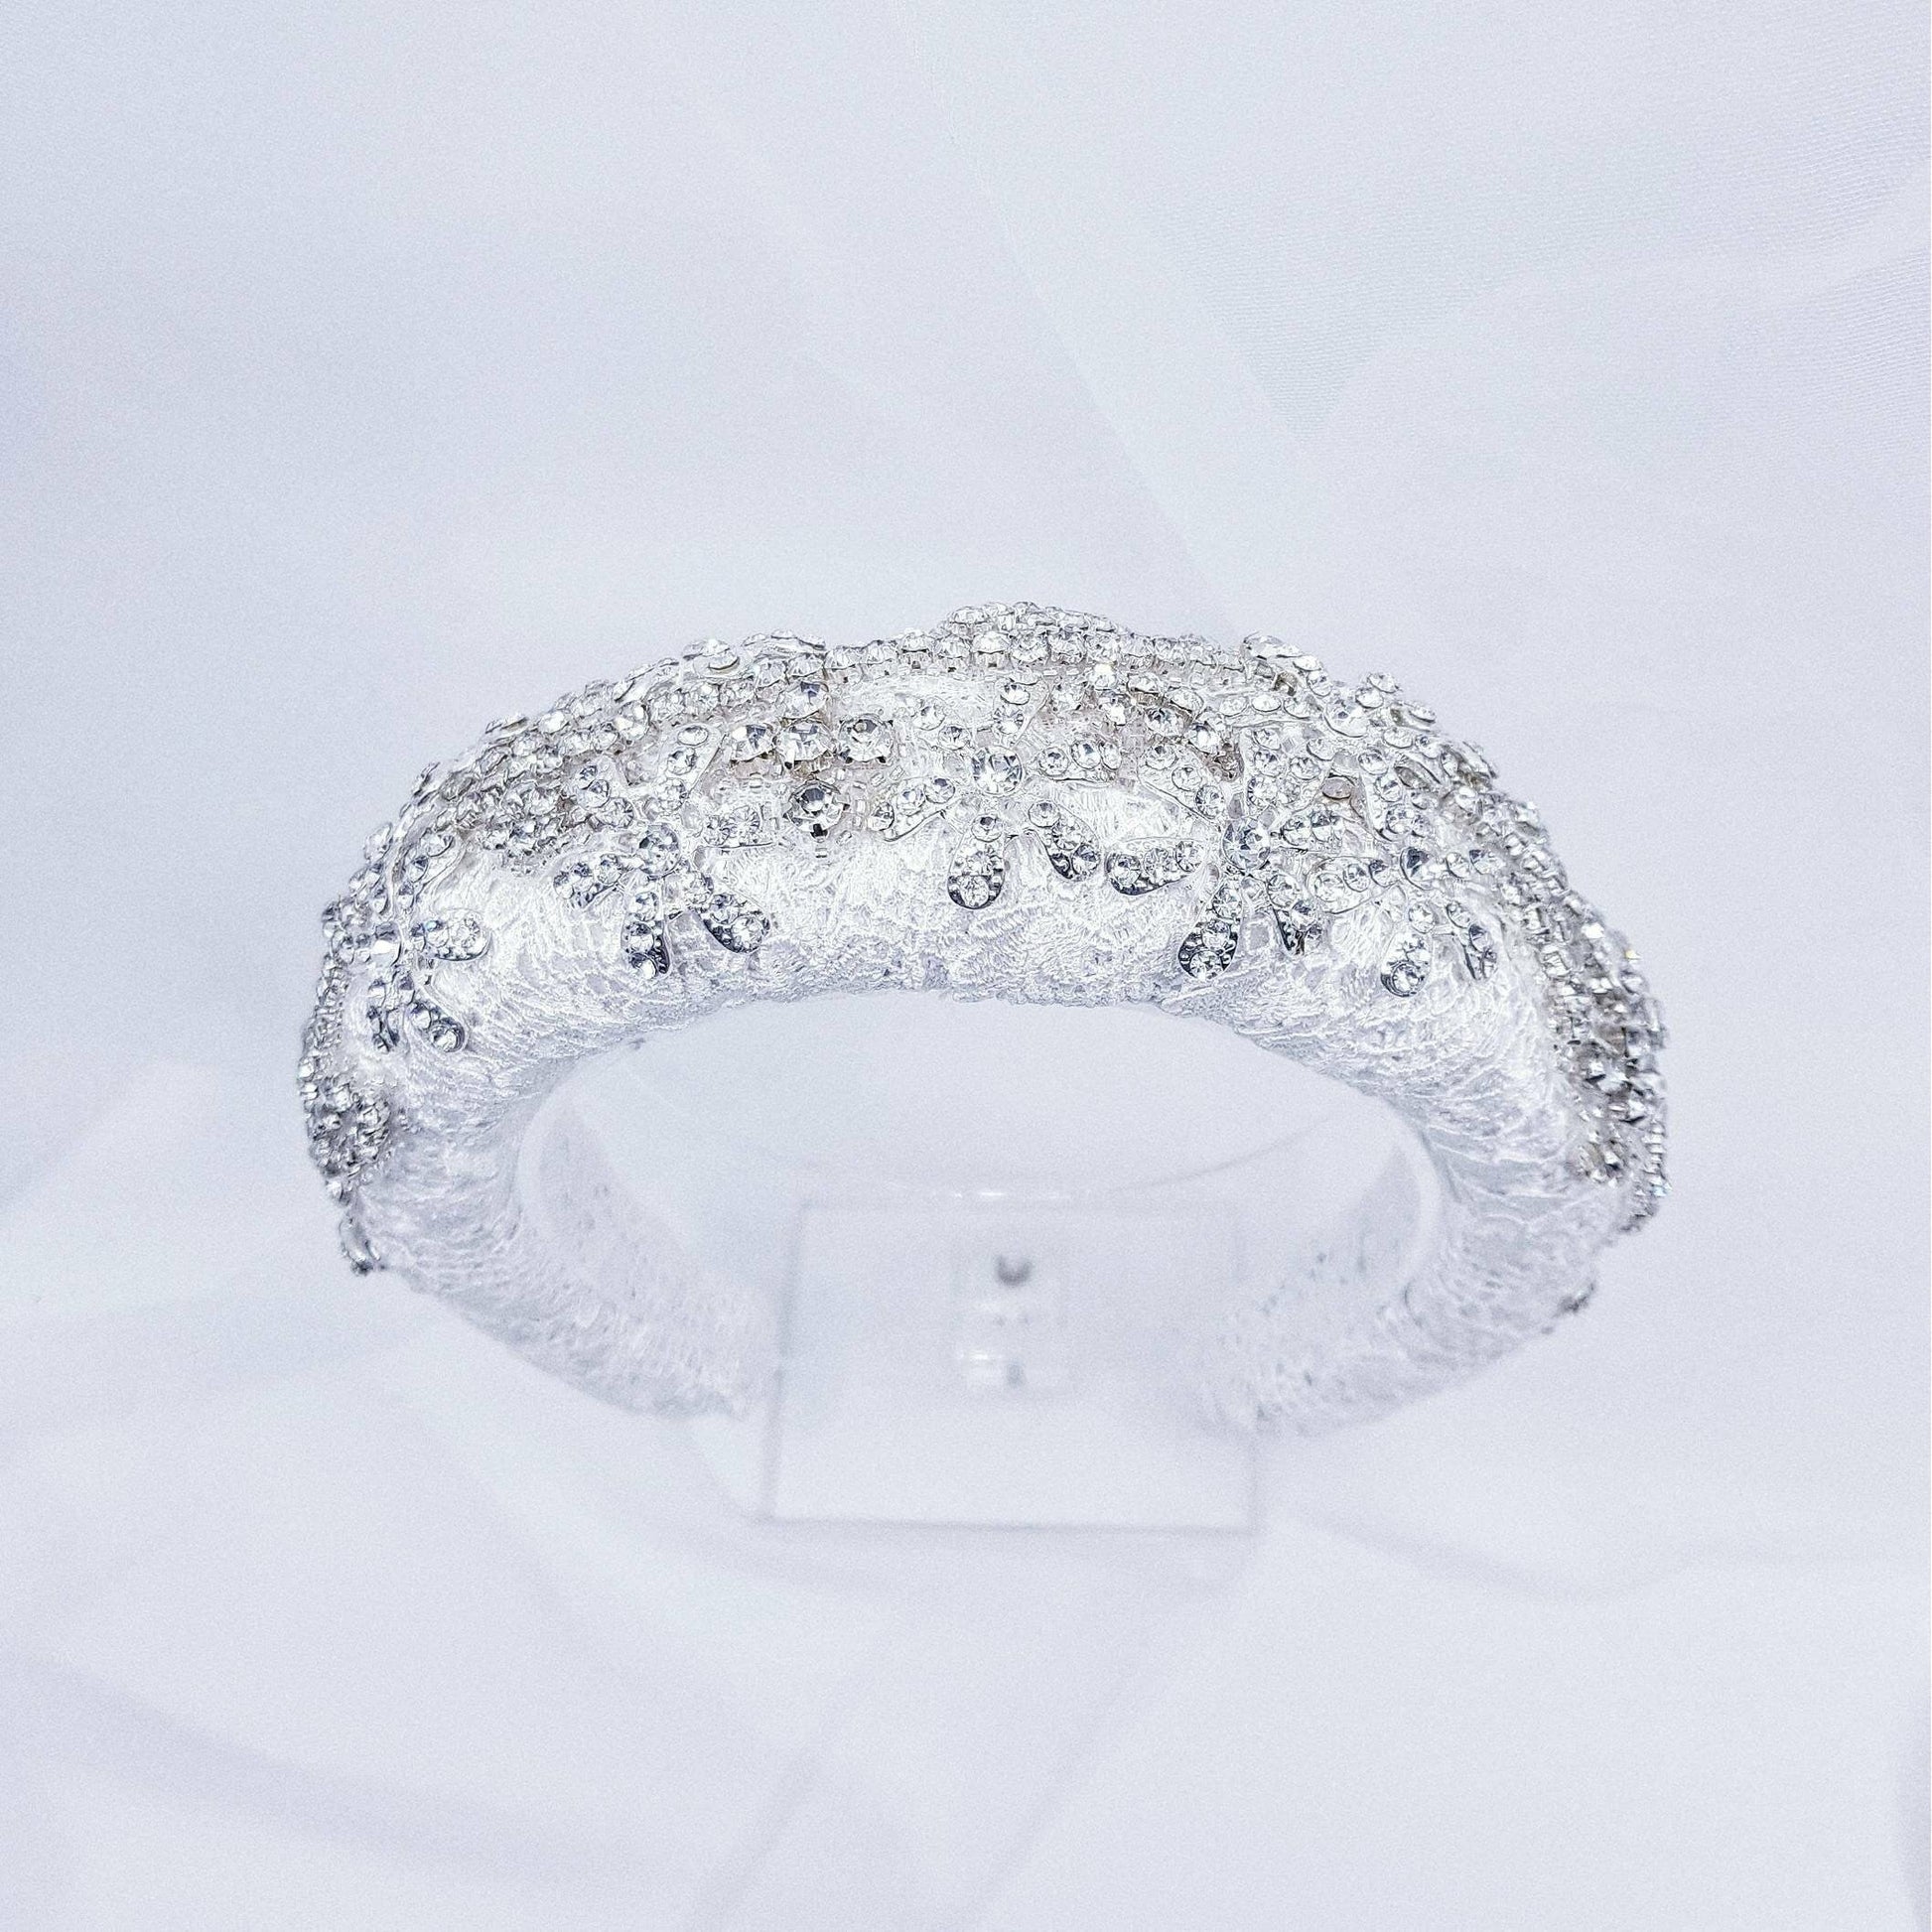 LA ROSE Padded Lace Headband White flower floral lace headpieces millinery Australia wedding bridal bling crystal hair jewel accessory puffy